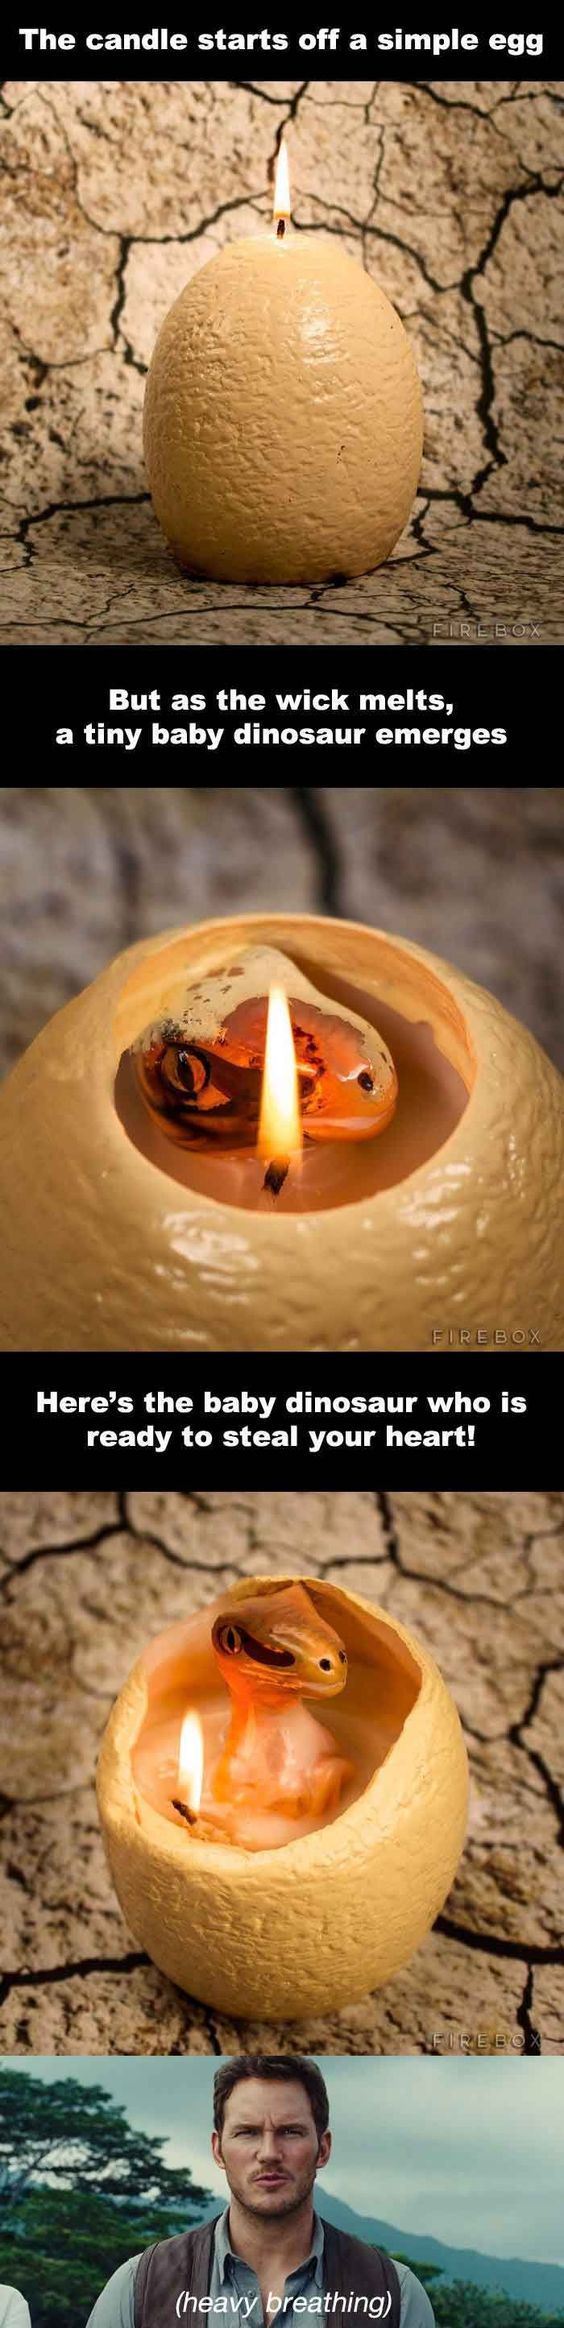 Dinosaur - The candle starts off a simple egg Fire Box But as the wick melts, a tiny baby dinosaur emerges Fure Box Here's the baby dinosaur who is ready to steal your heart! Fire Box heavy breathing